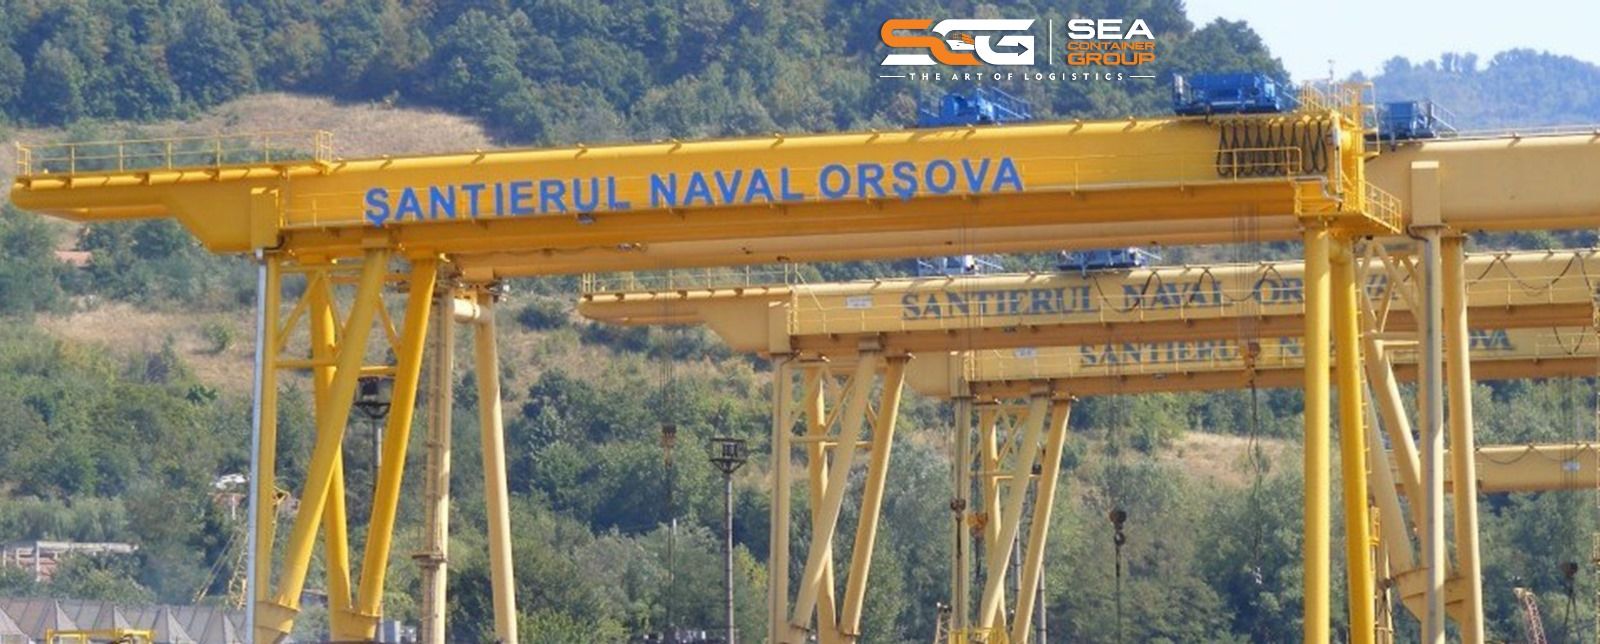 Sea Container Services has become the majority shareholder at Santierul Naval Orsova (Orsova Shipyard)